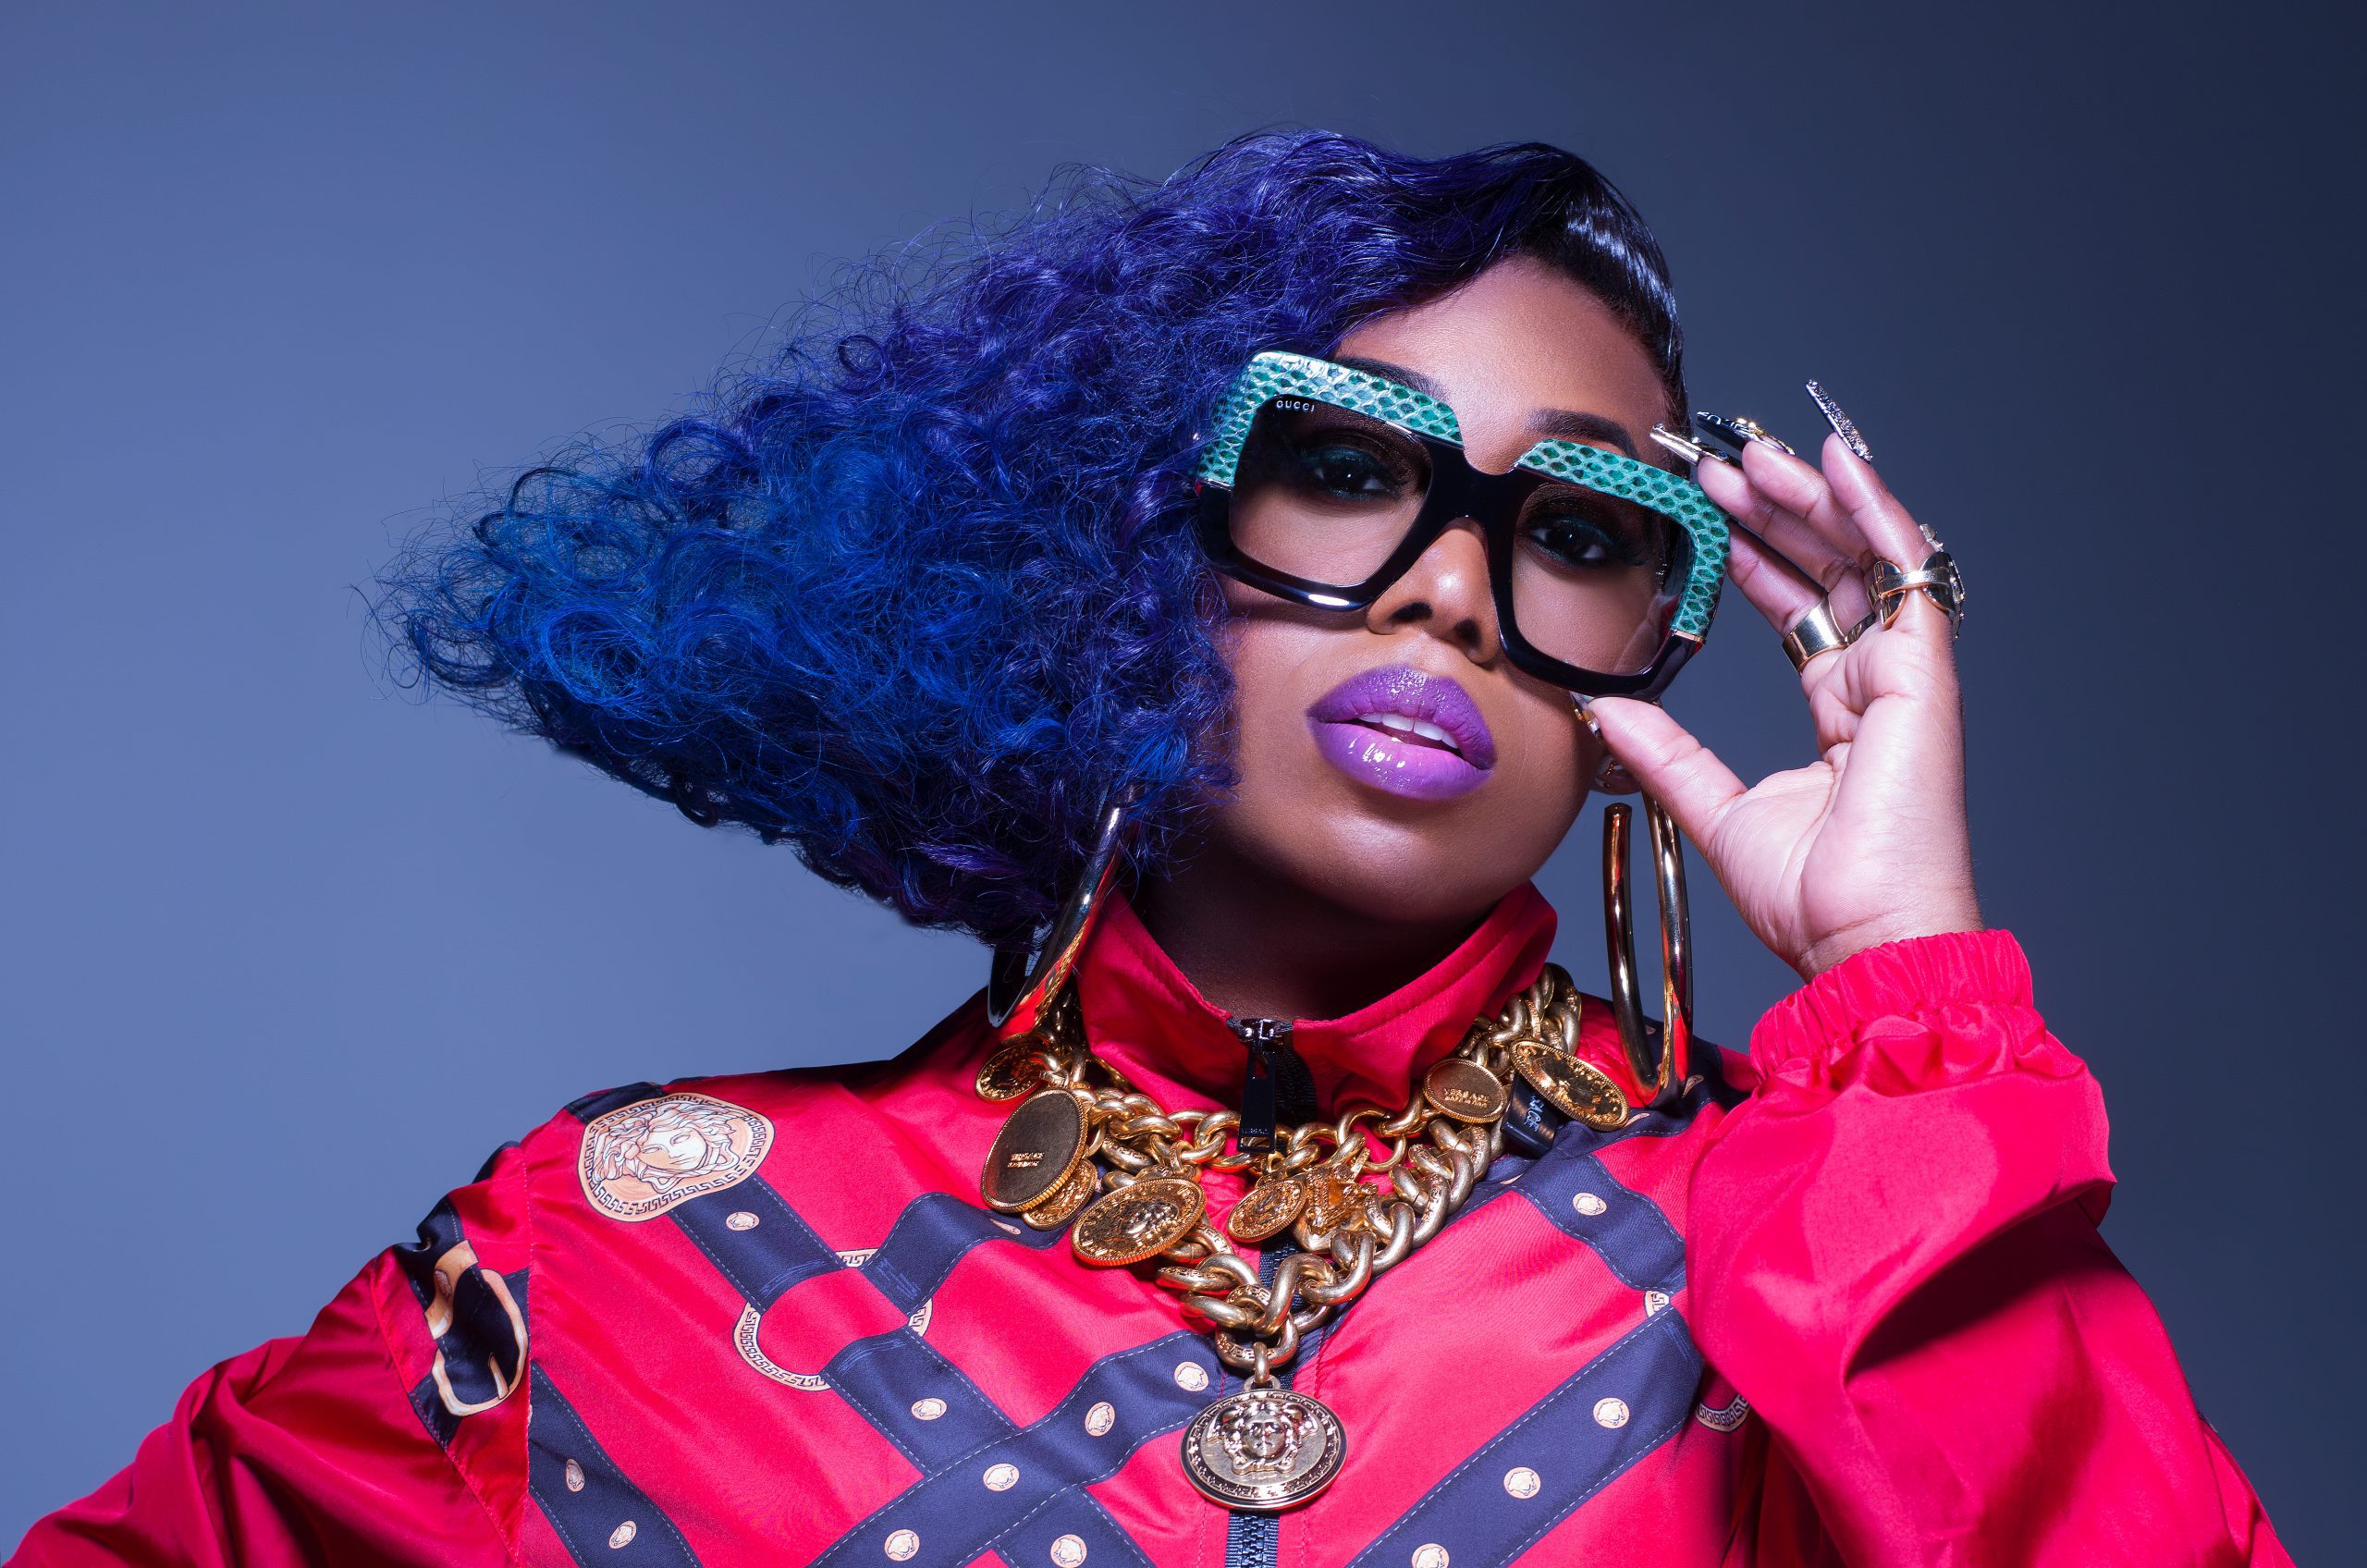 MUSIC ICON MISSY ELLIOTT TO BE HONORED WITH STAR ON THE HOLLYWOOD WALK